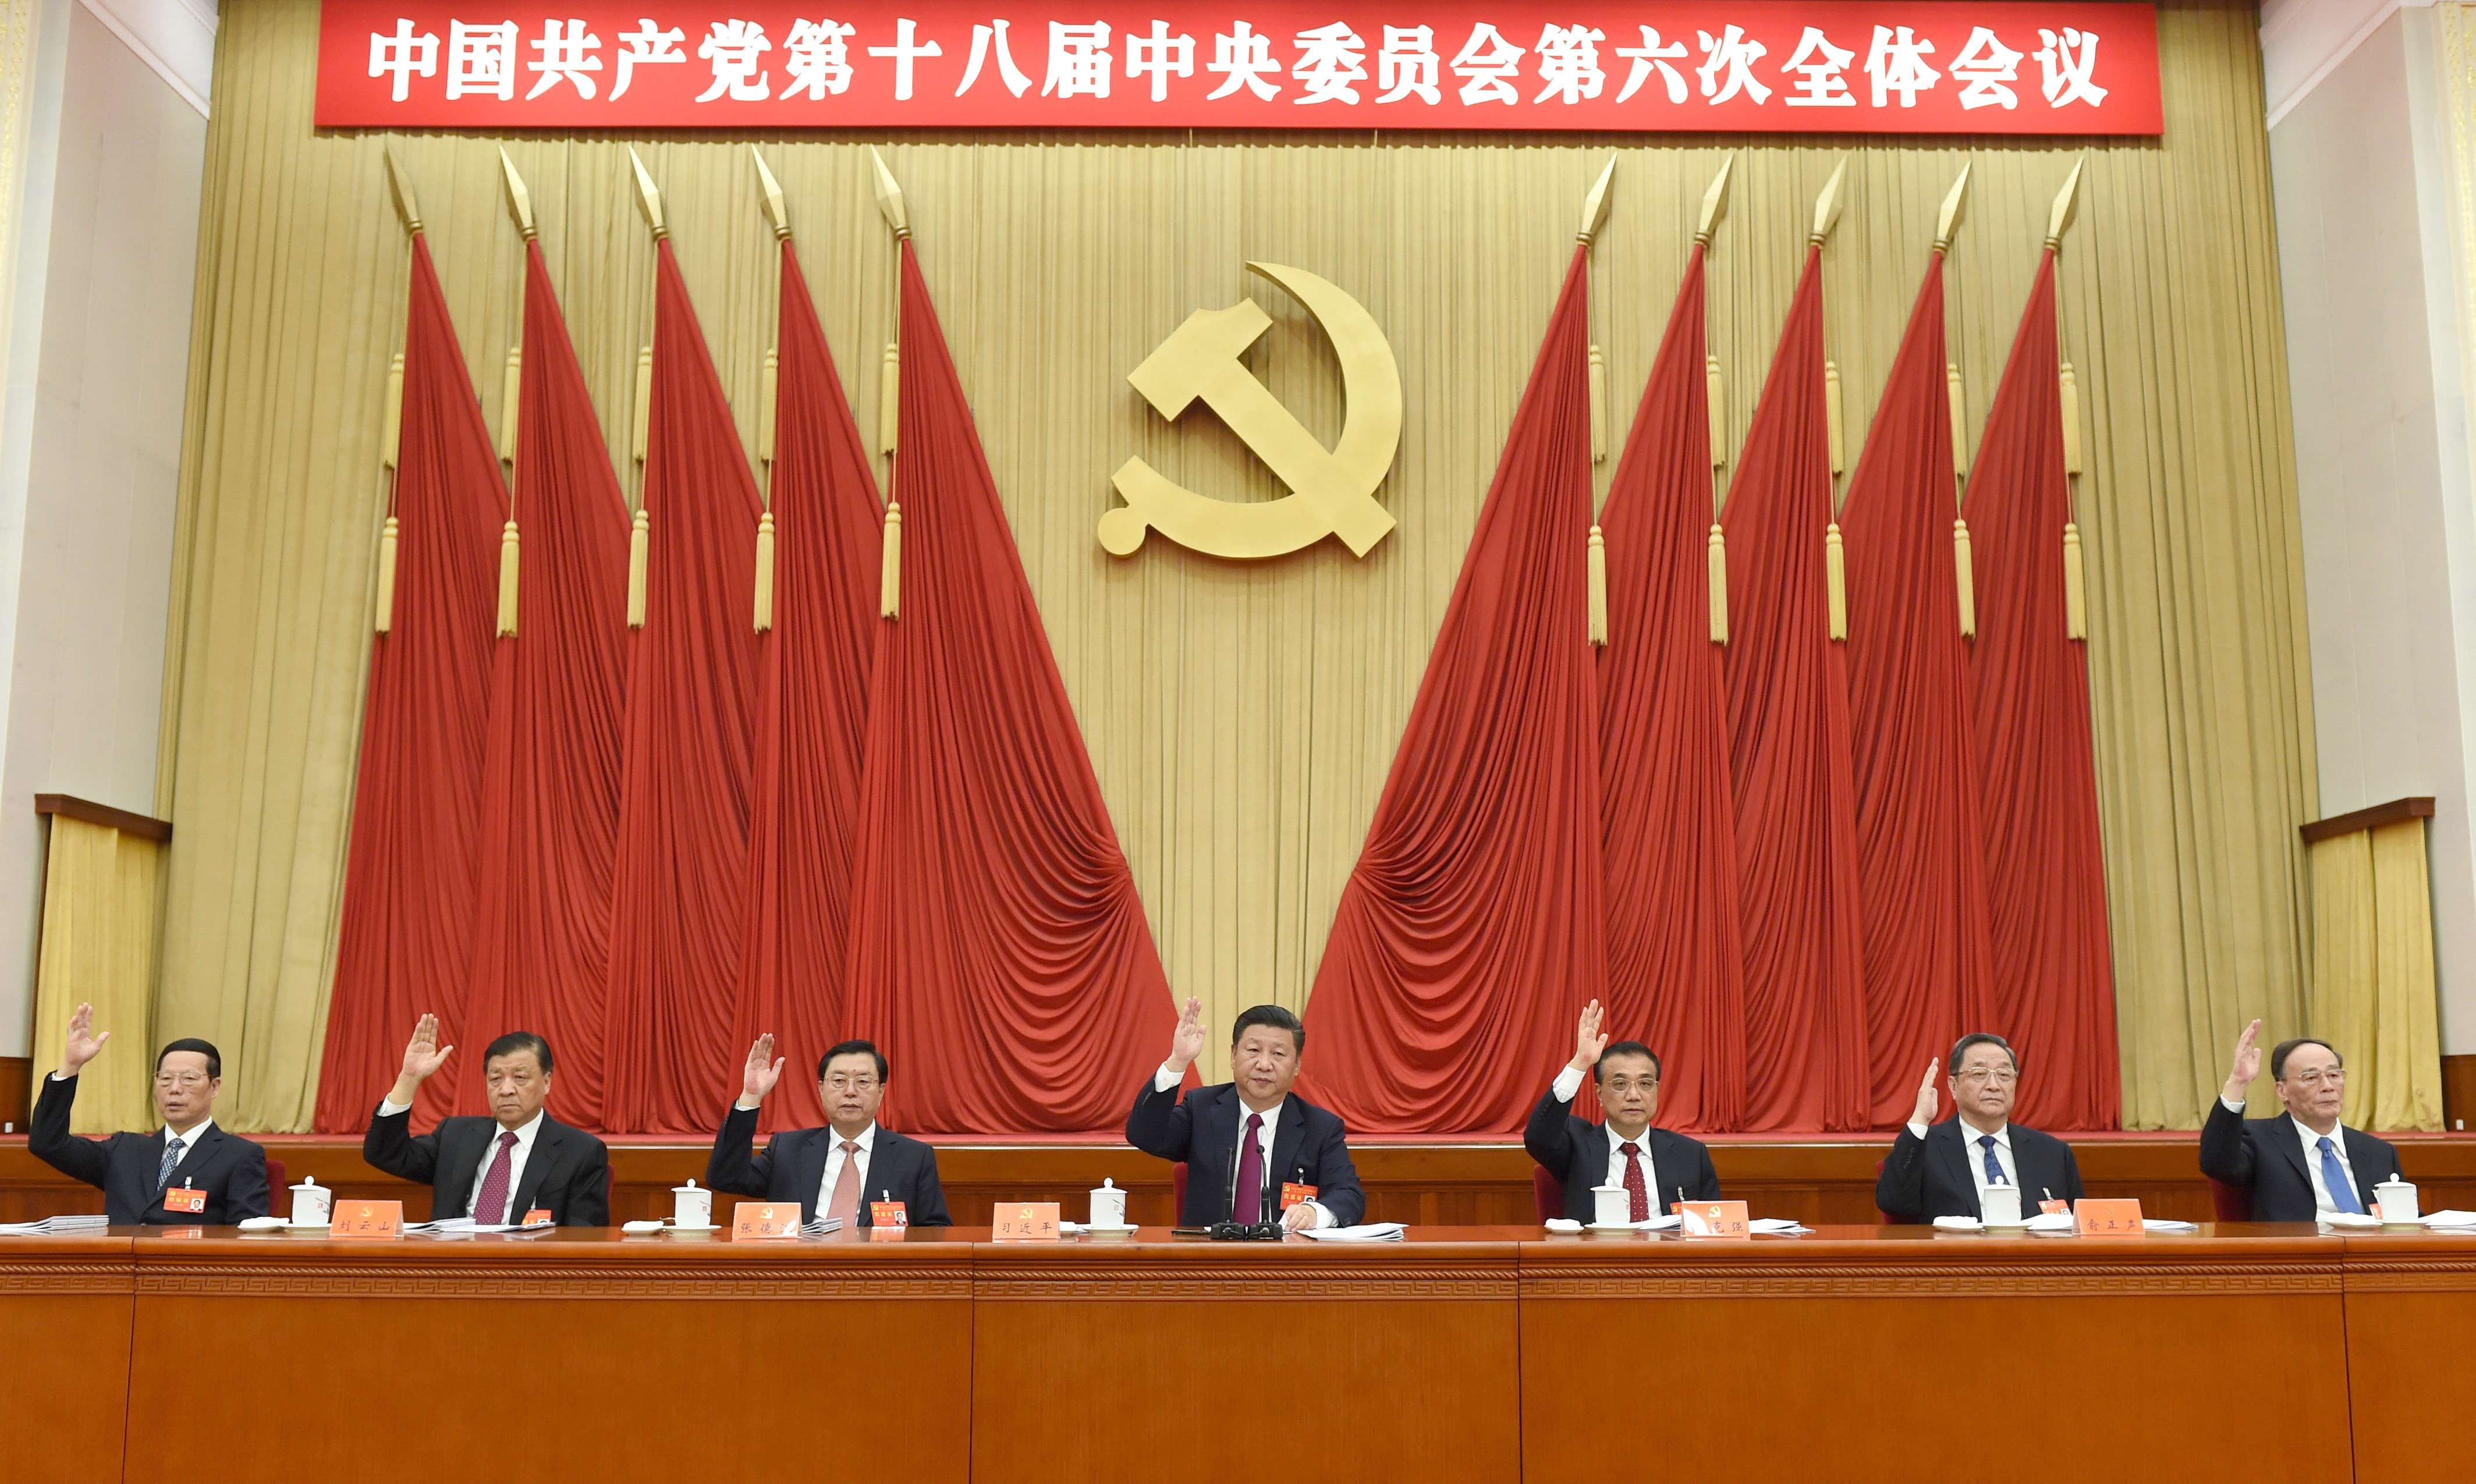 President Xi Jinping (centre), flanked by Premier Li Keqiang (right) and National People’s Congress Standing Committee chairman Zhang Dejiang, leads proceedings at the sixth plenum of the 18th party central committee in Beijing on October 27. Photo: Xinhua